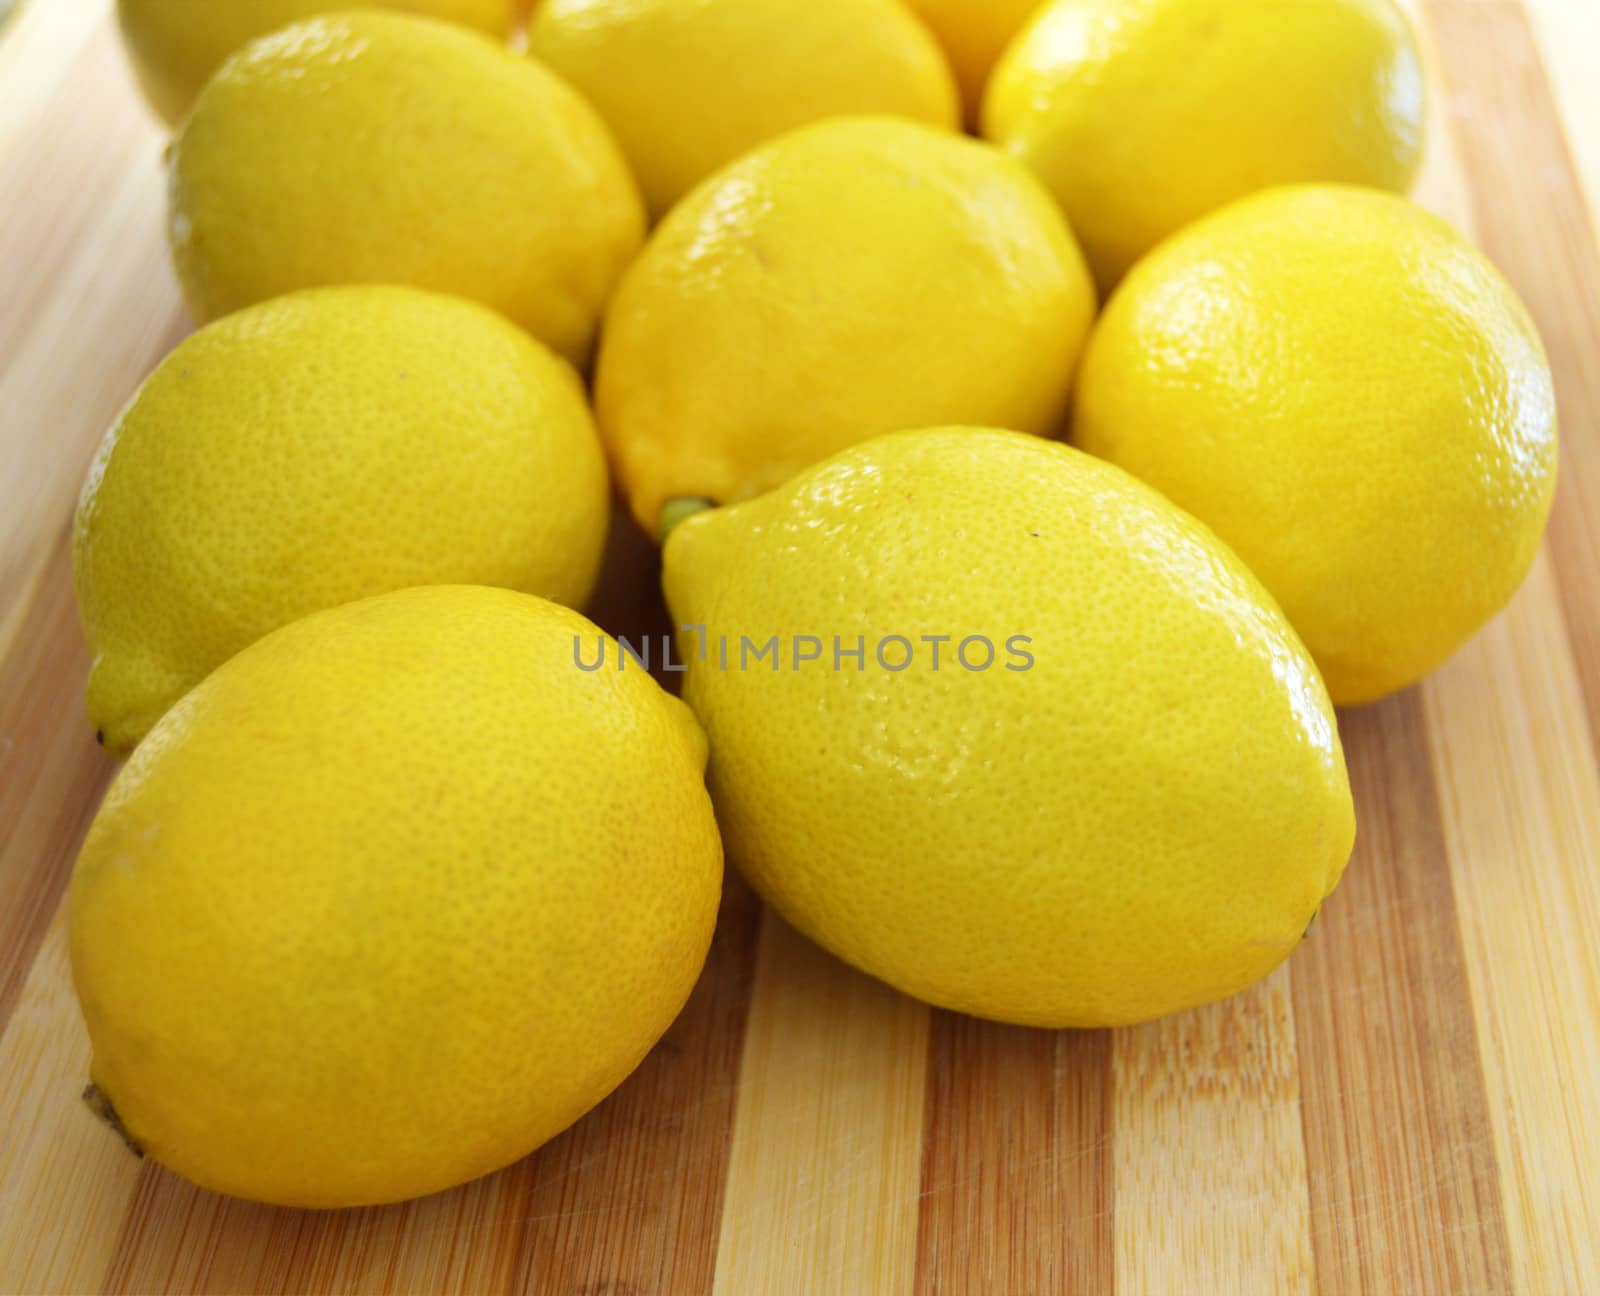 Lemon paintings on the finest wooden chopping board